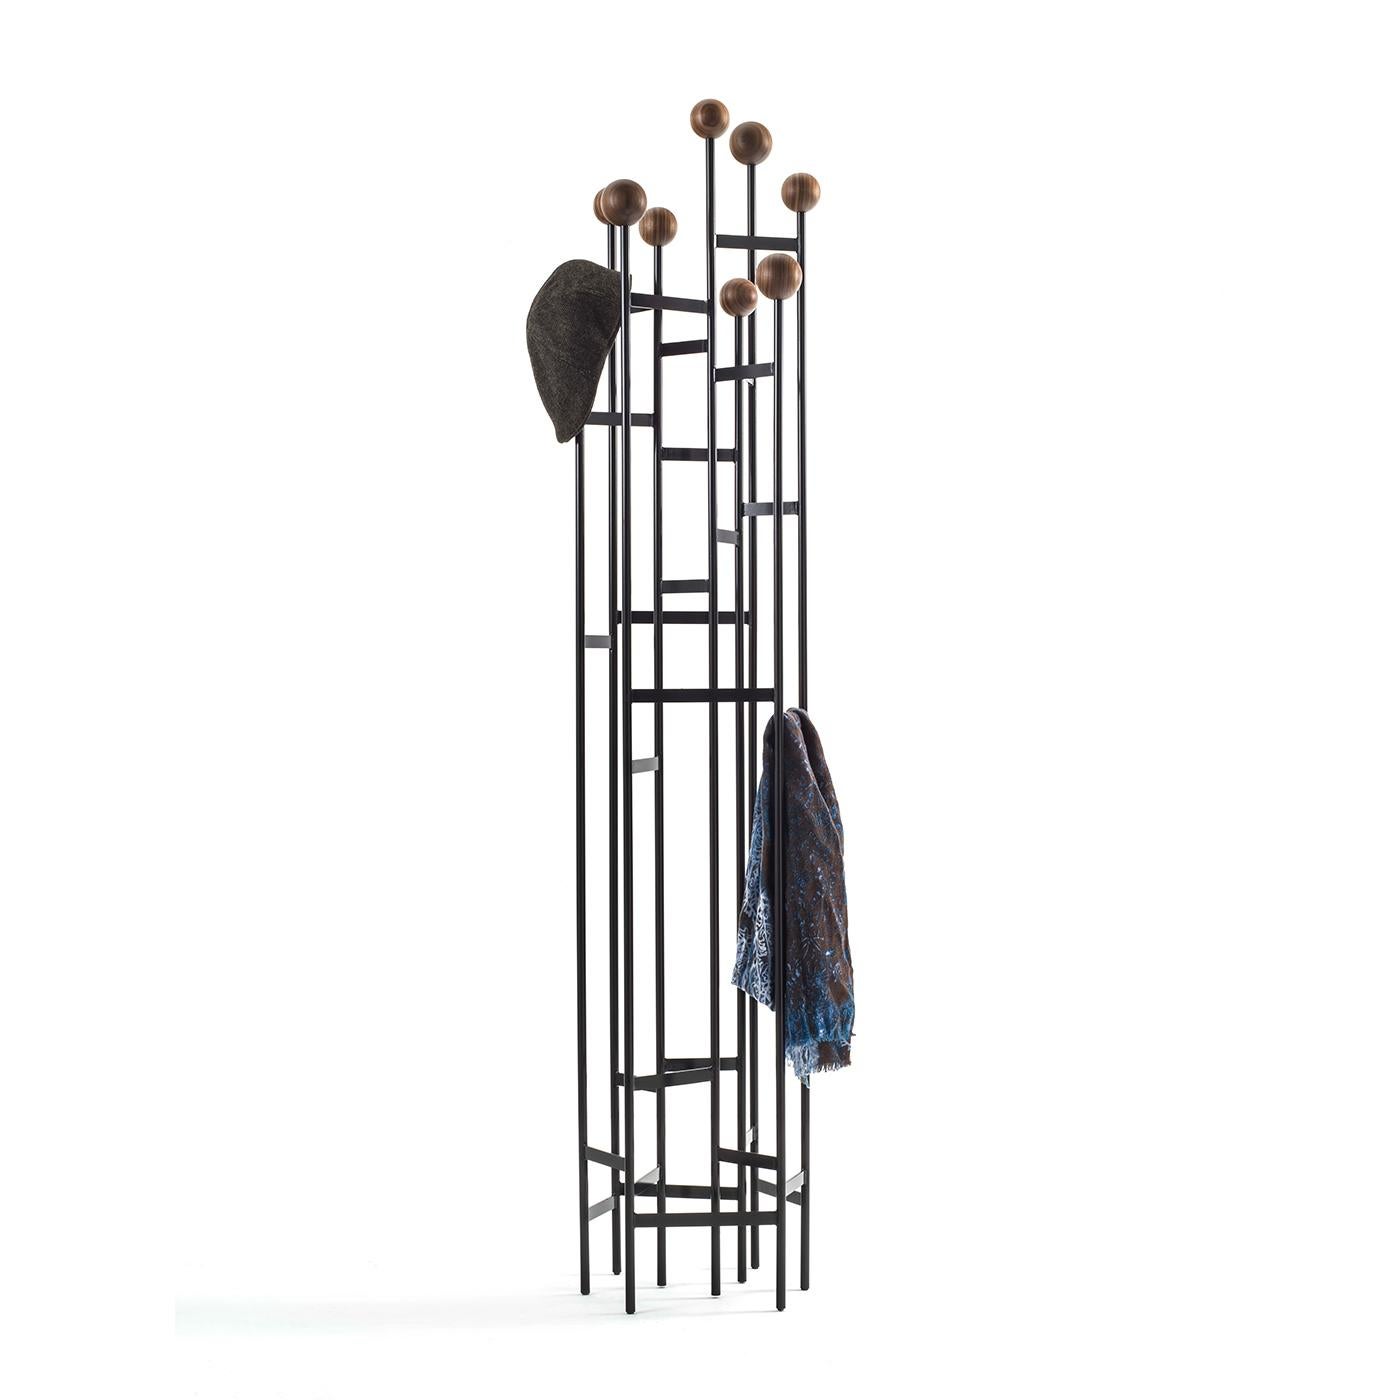 The Planets coat stand is an elegant and convenient addition to your hallway or living space. Made from metal in a black lacquer finish, it features solid wood spheres at the top of the posts for added character and style and furthermore to protect